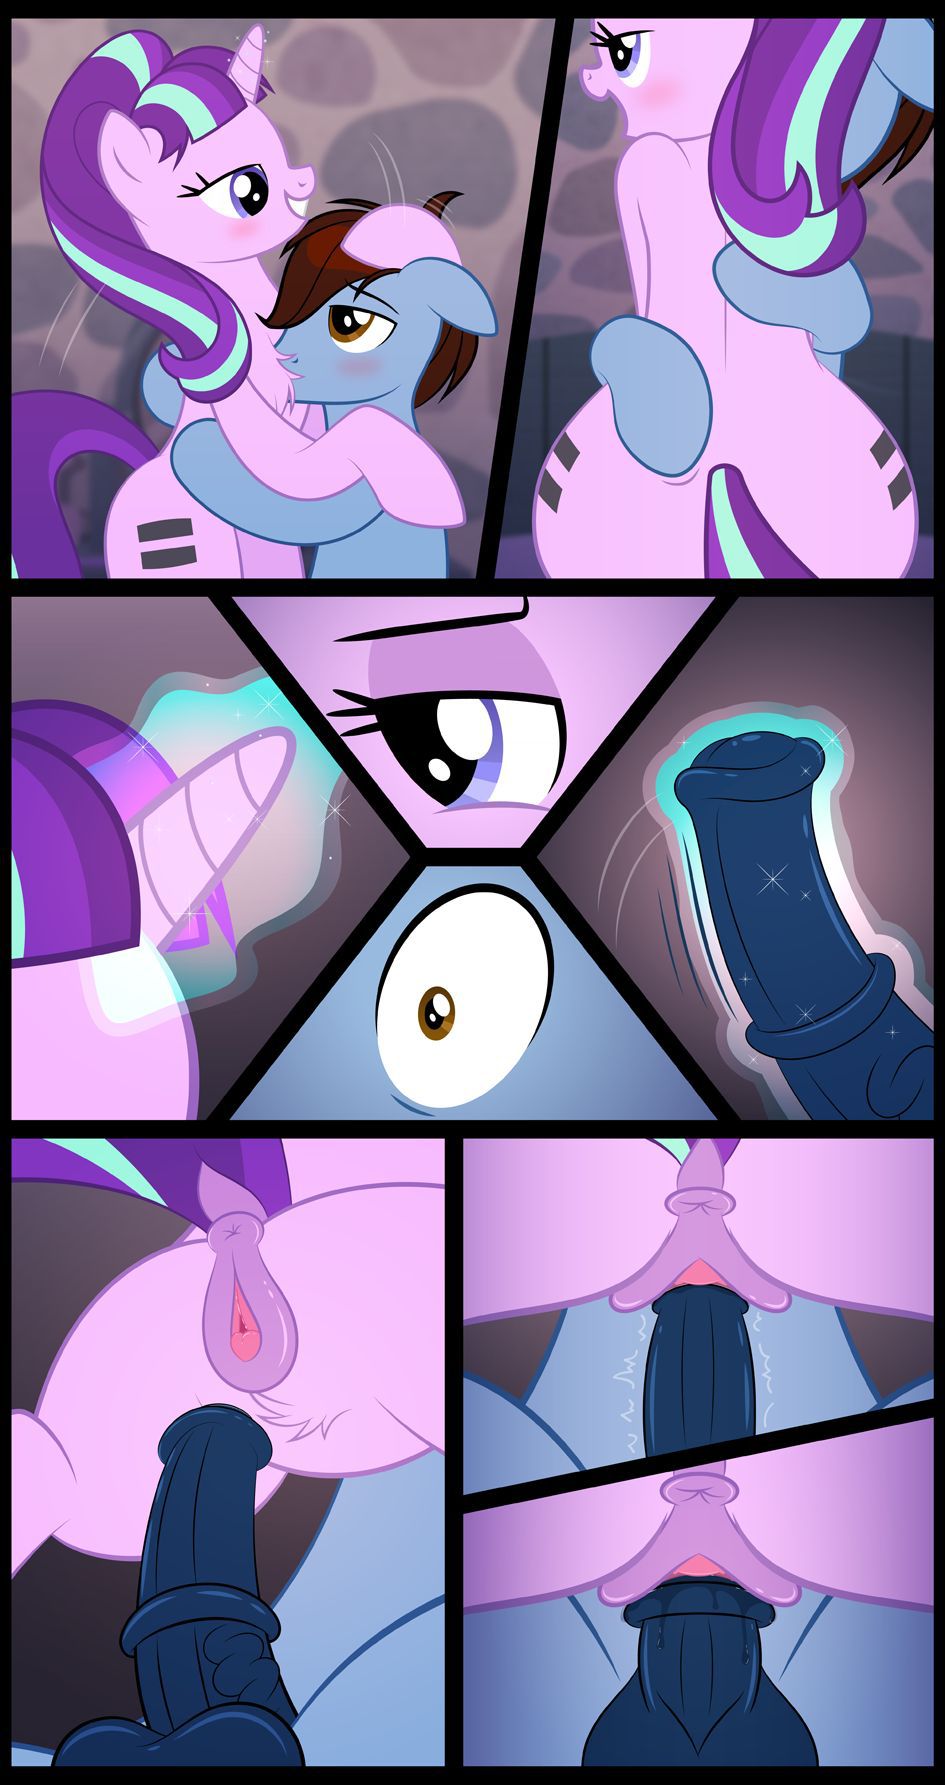 [Culu-Bluebeaver] The Newcomer (My Little Pony: Friendship is Magic) 16